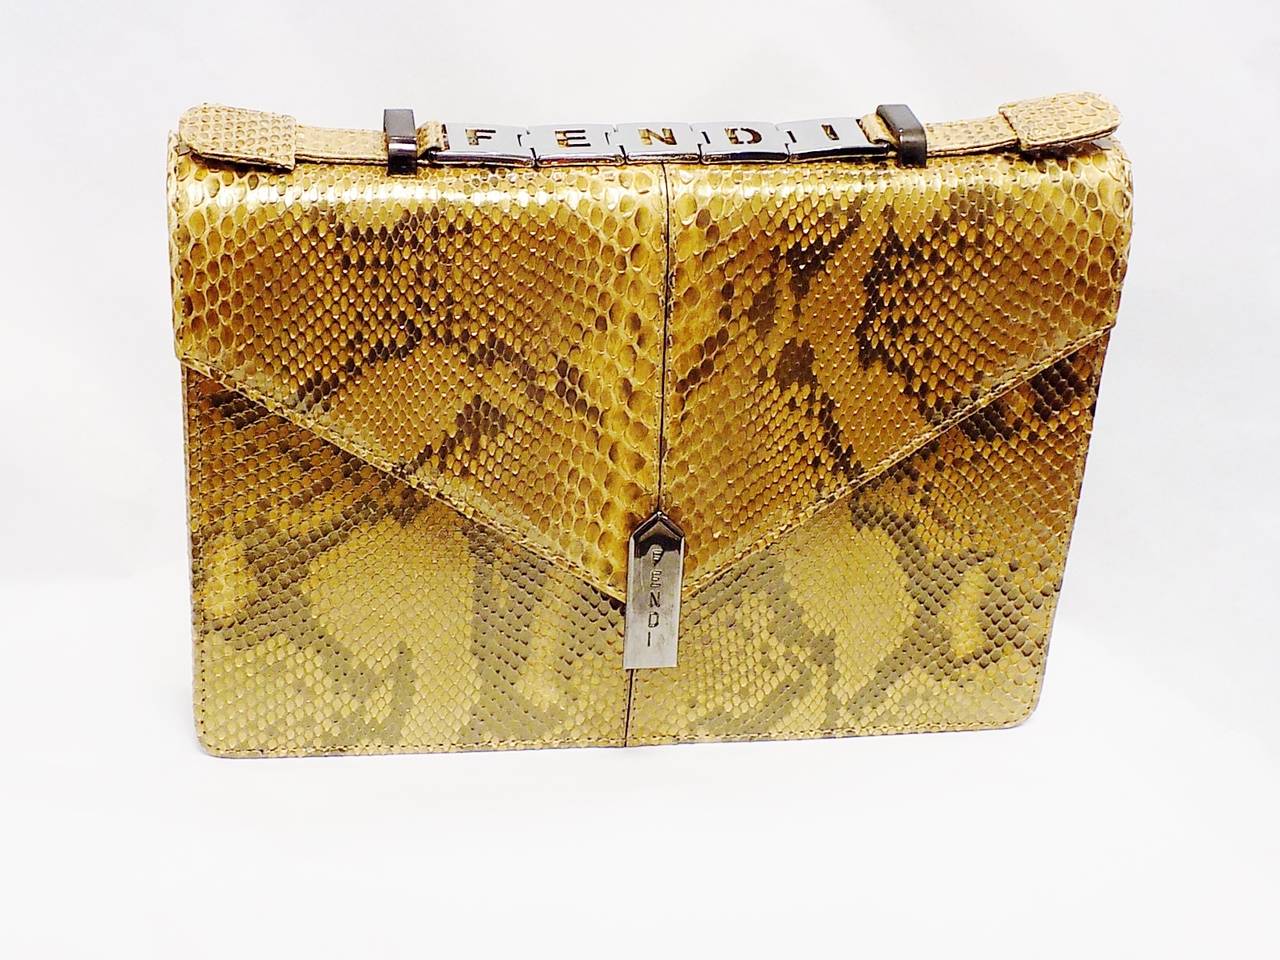 Brown Fendi special order bag  in python from 1996 with all documents  so awesome!